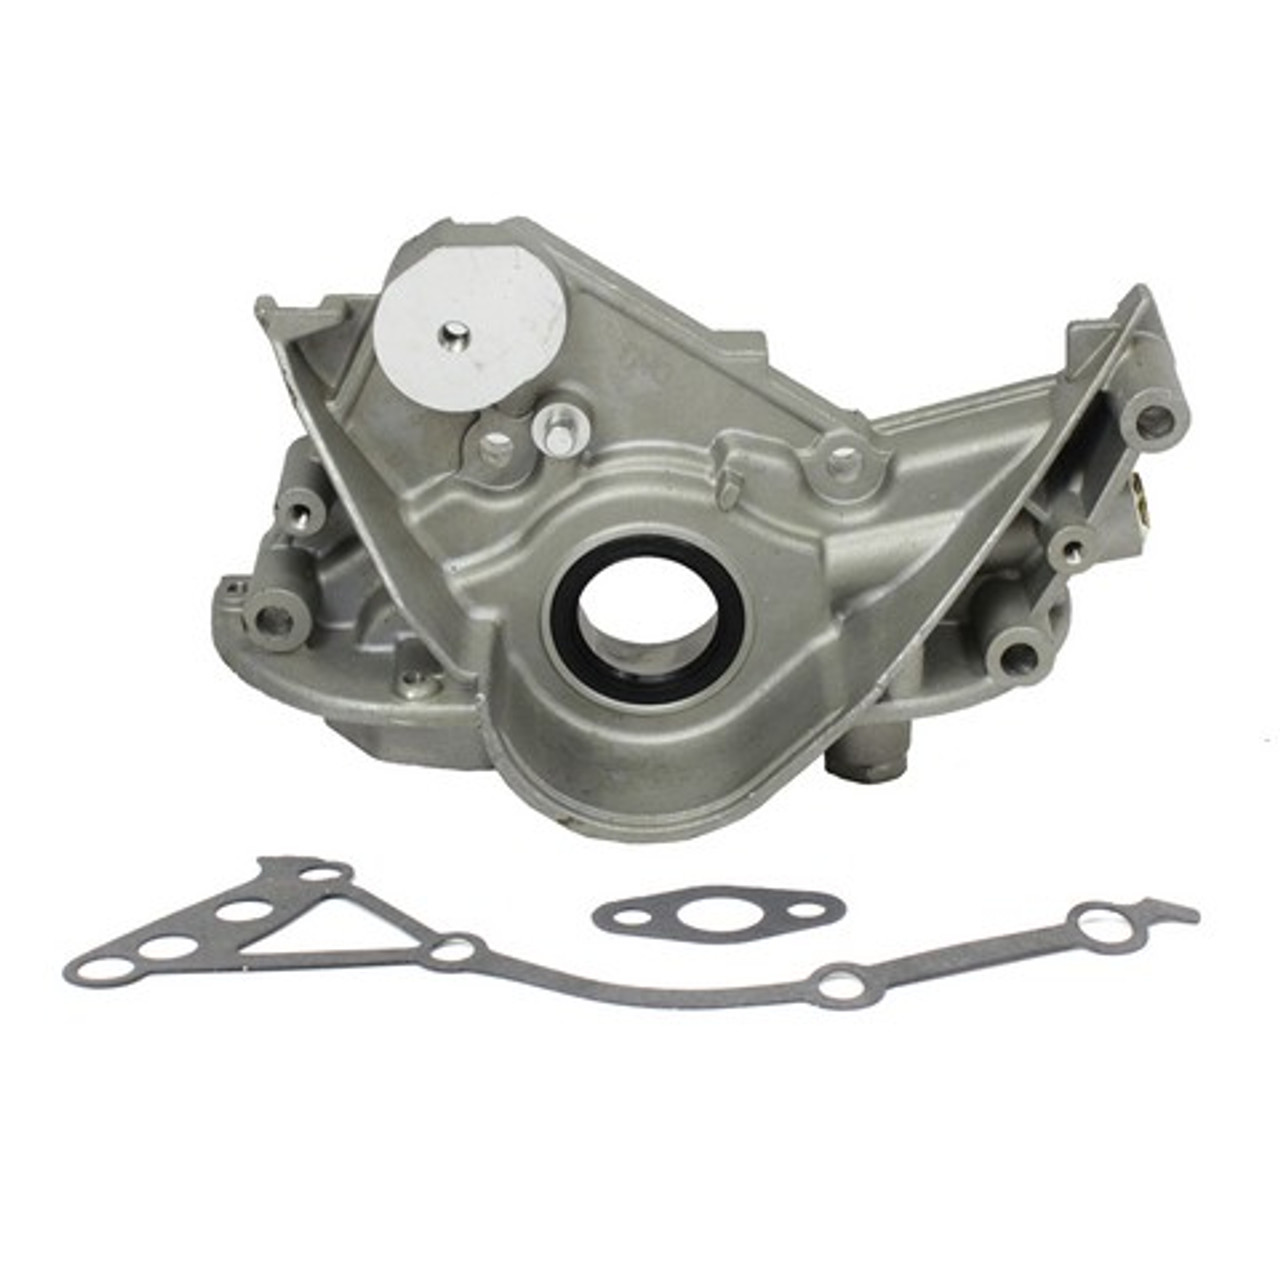 Oil Pump 3.0L 1990 Plymouth Voyager - OP125.85